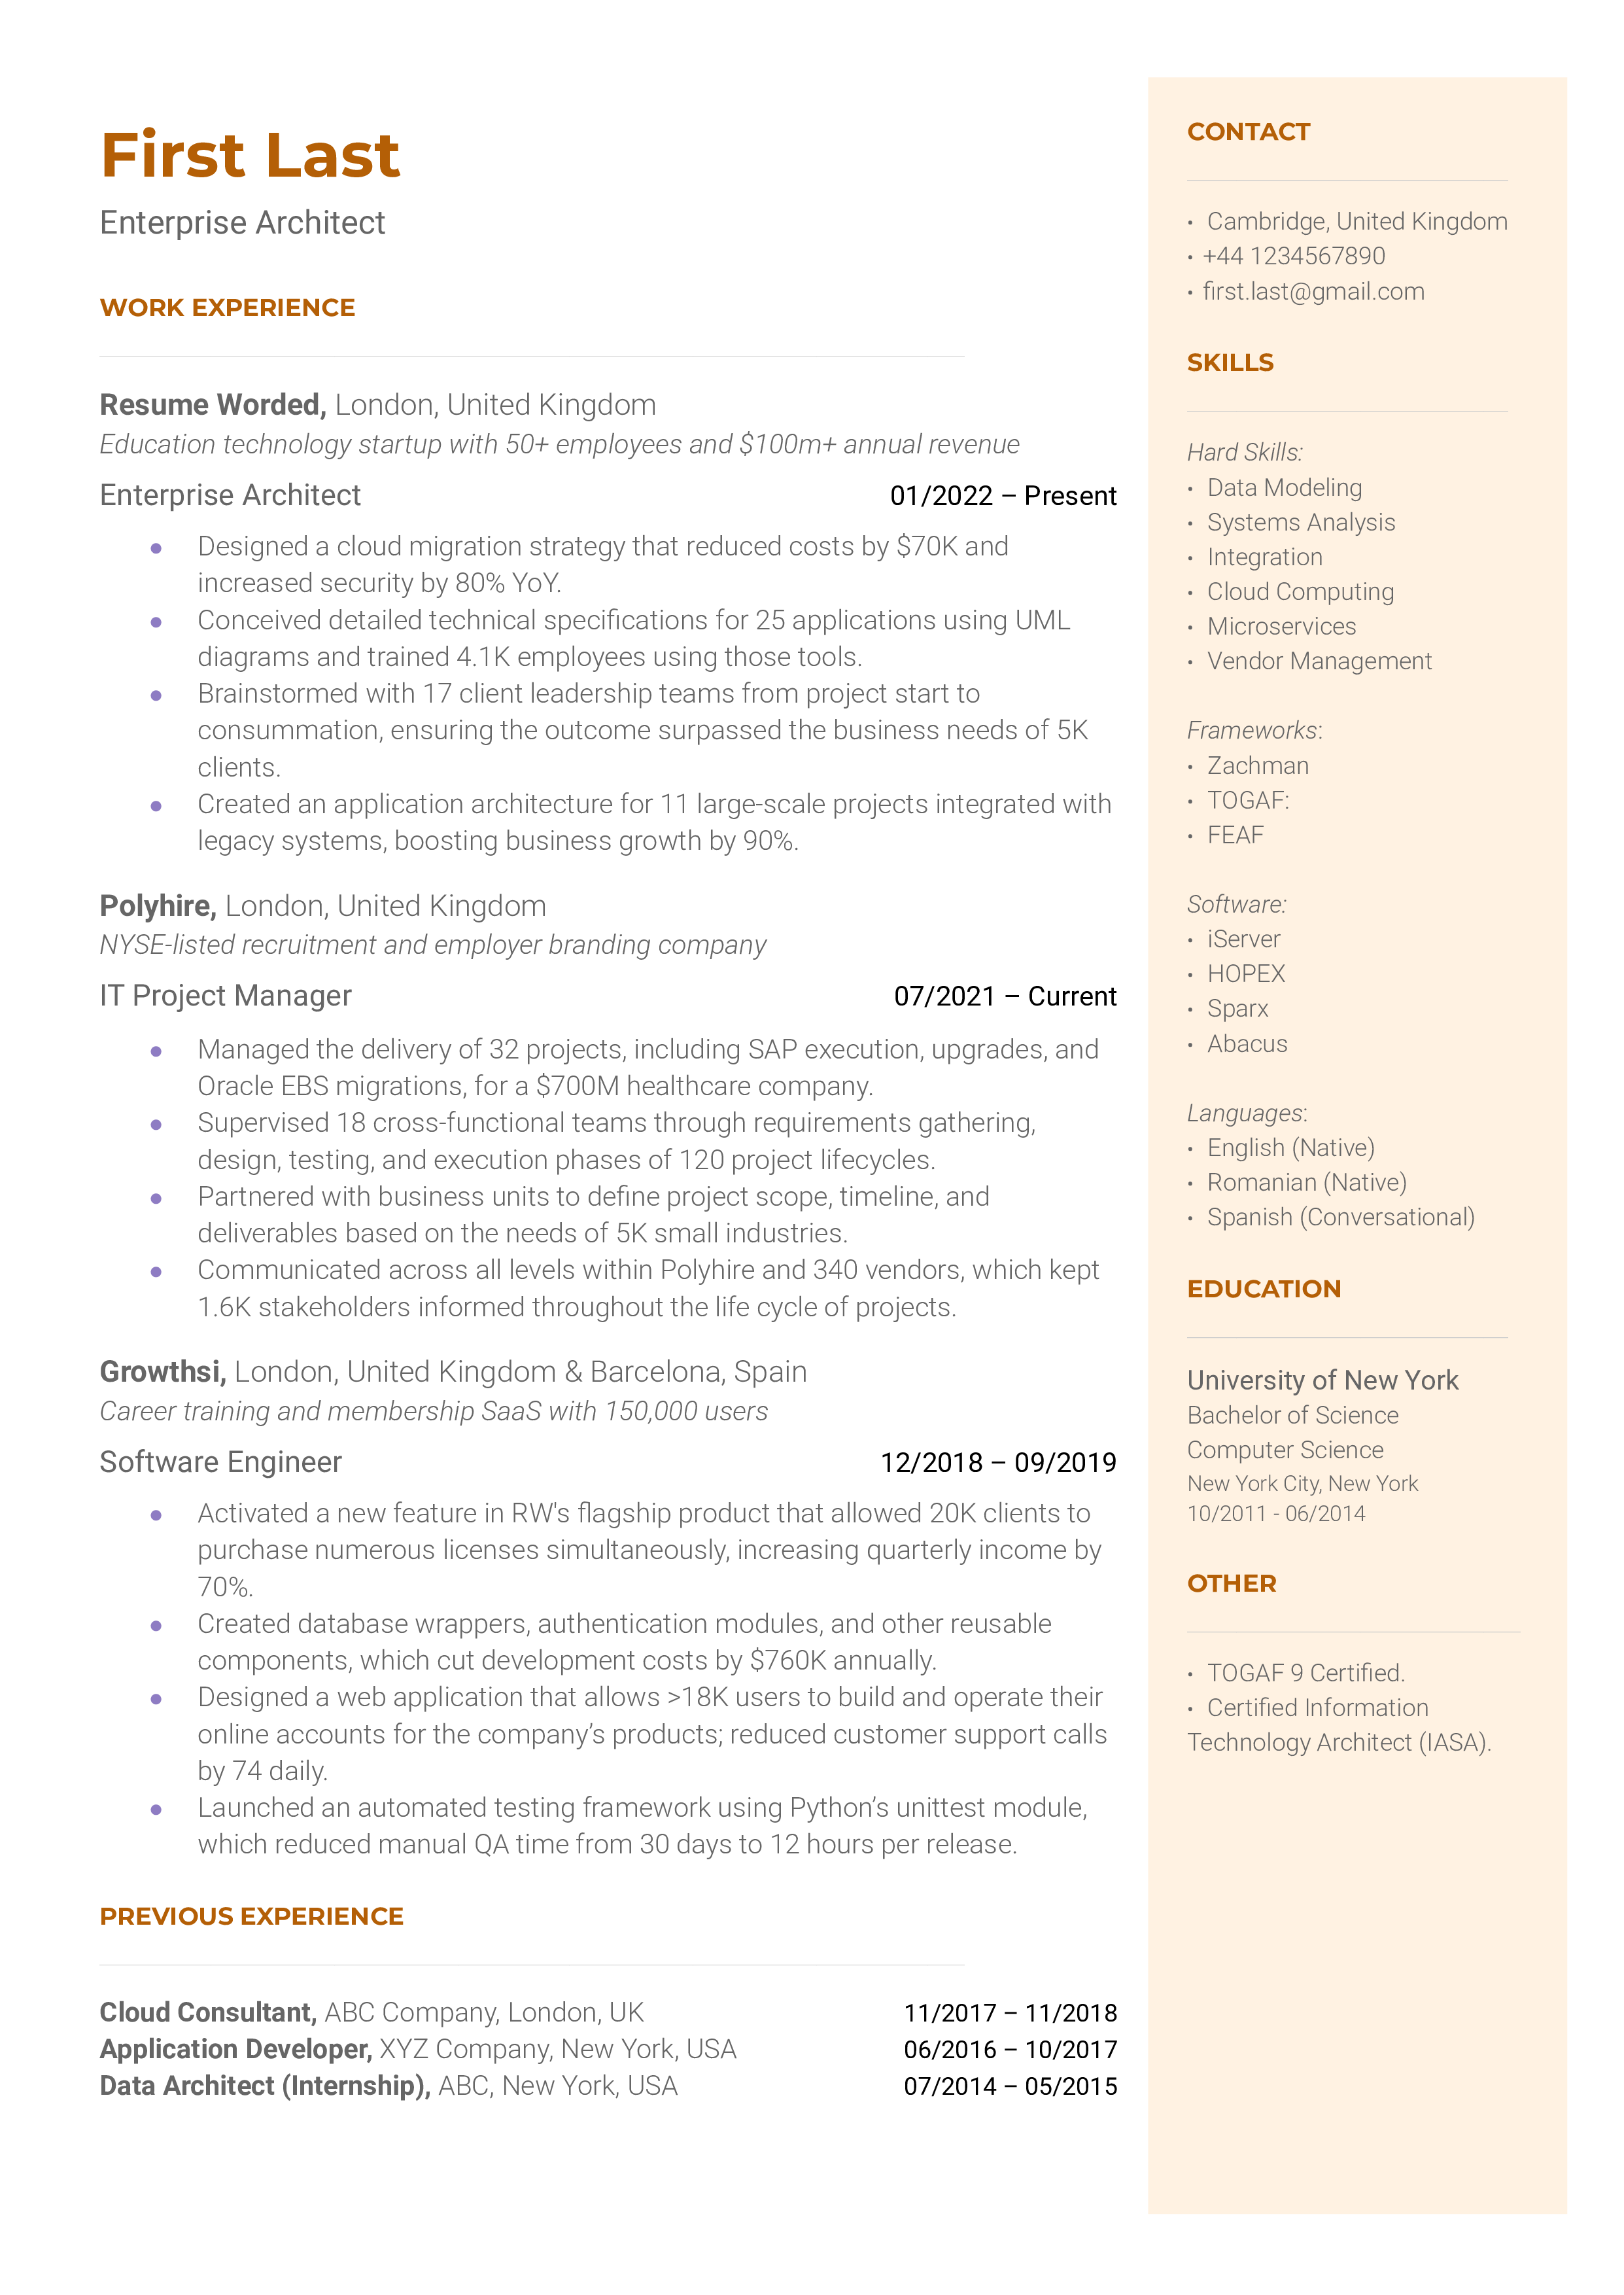 A CV screenshot highlighting key qualifications and experiences for an Enterprise Architect role.